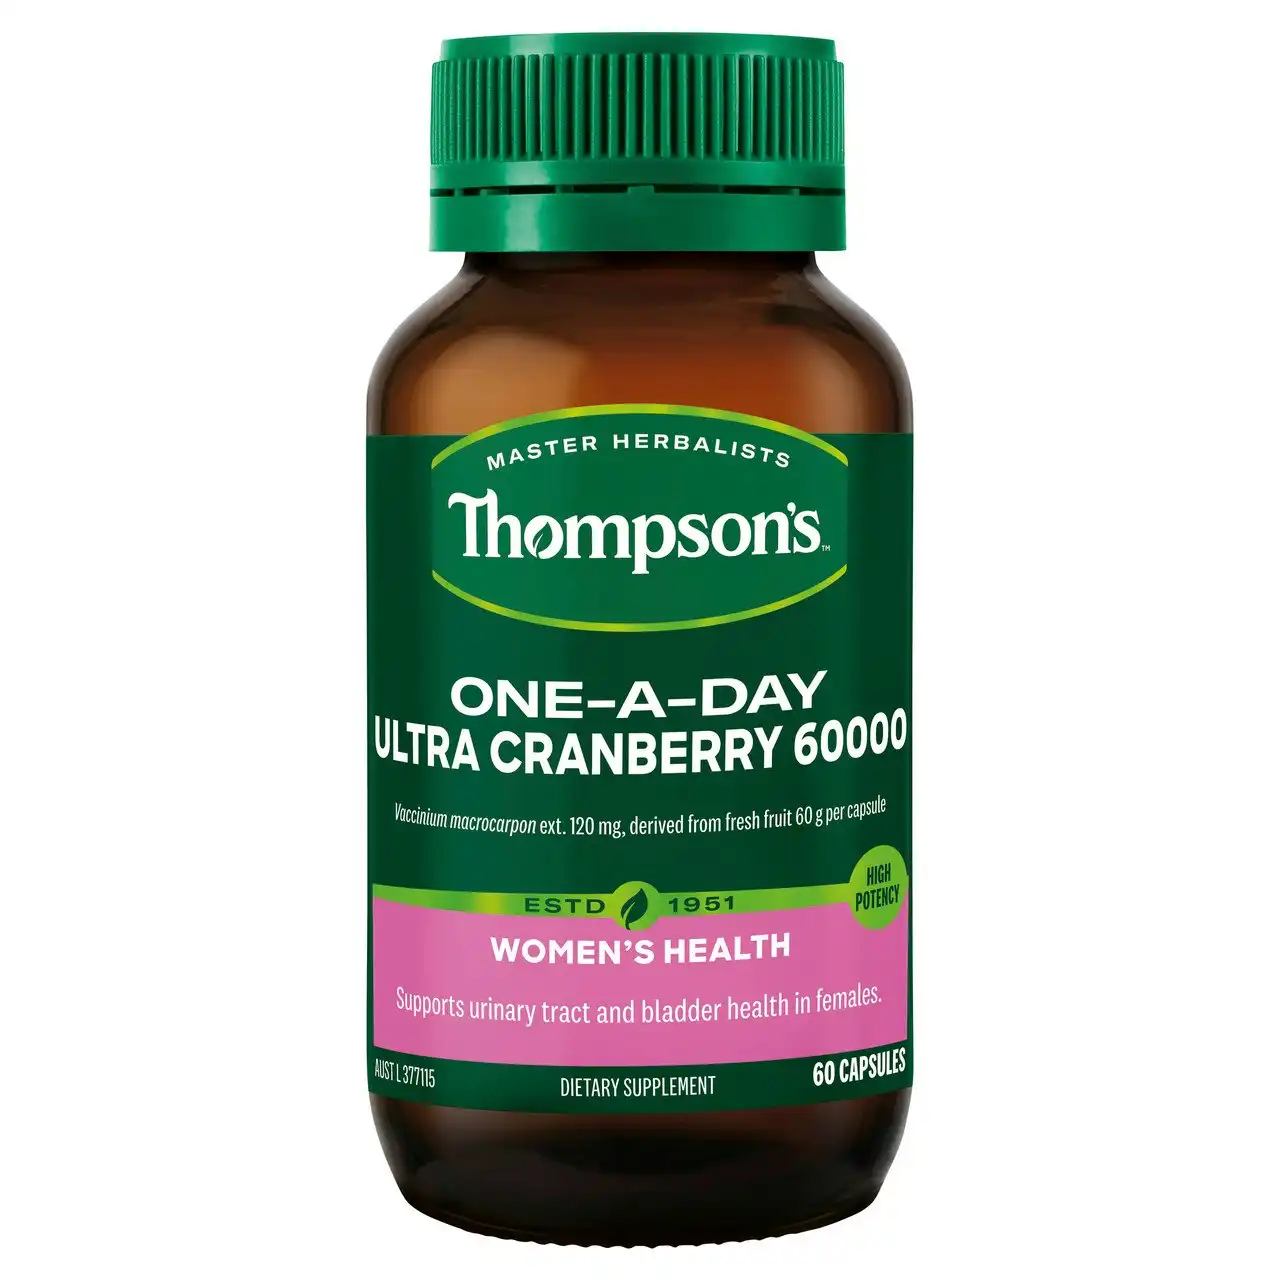 Thompson's One-a-day Ultra Cranberry 60000 60 Capsules